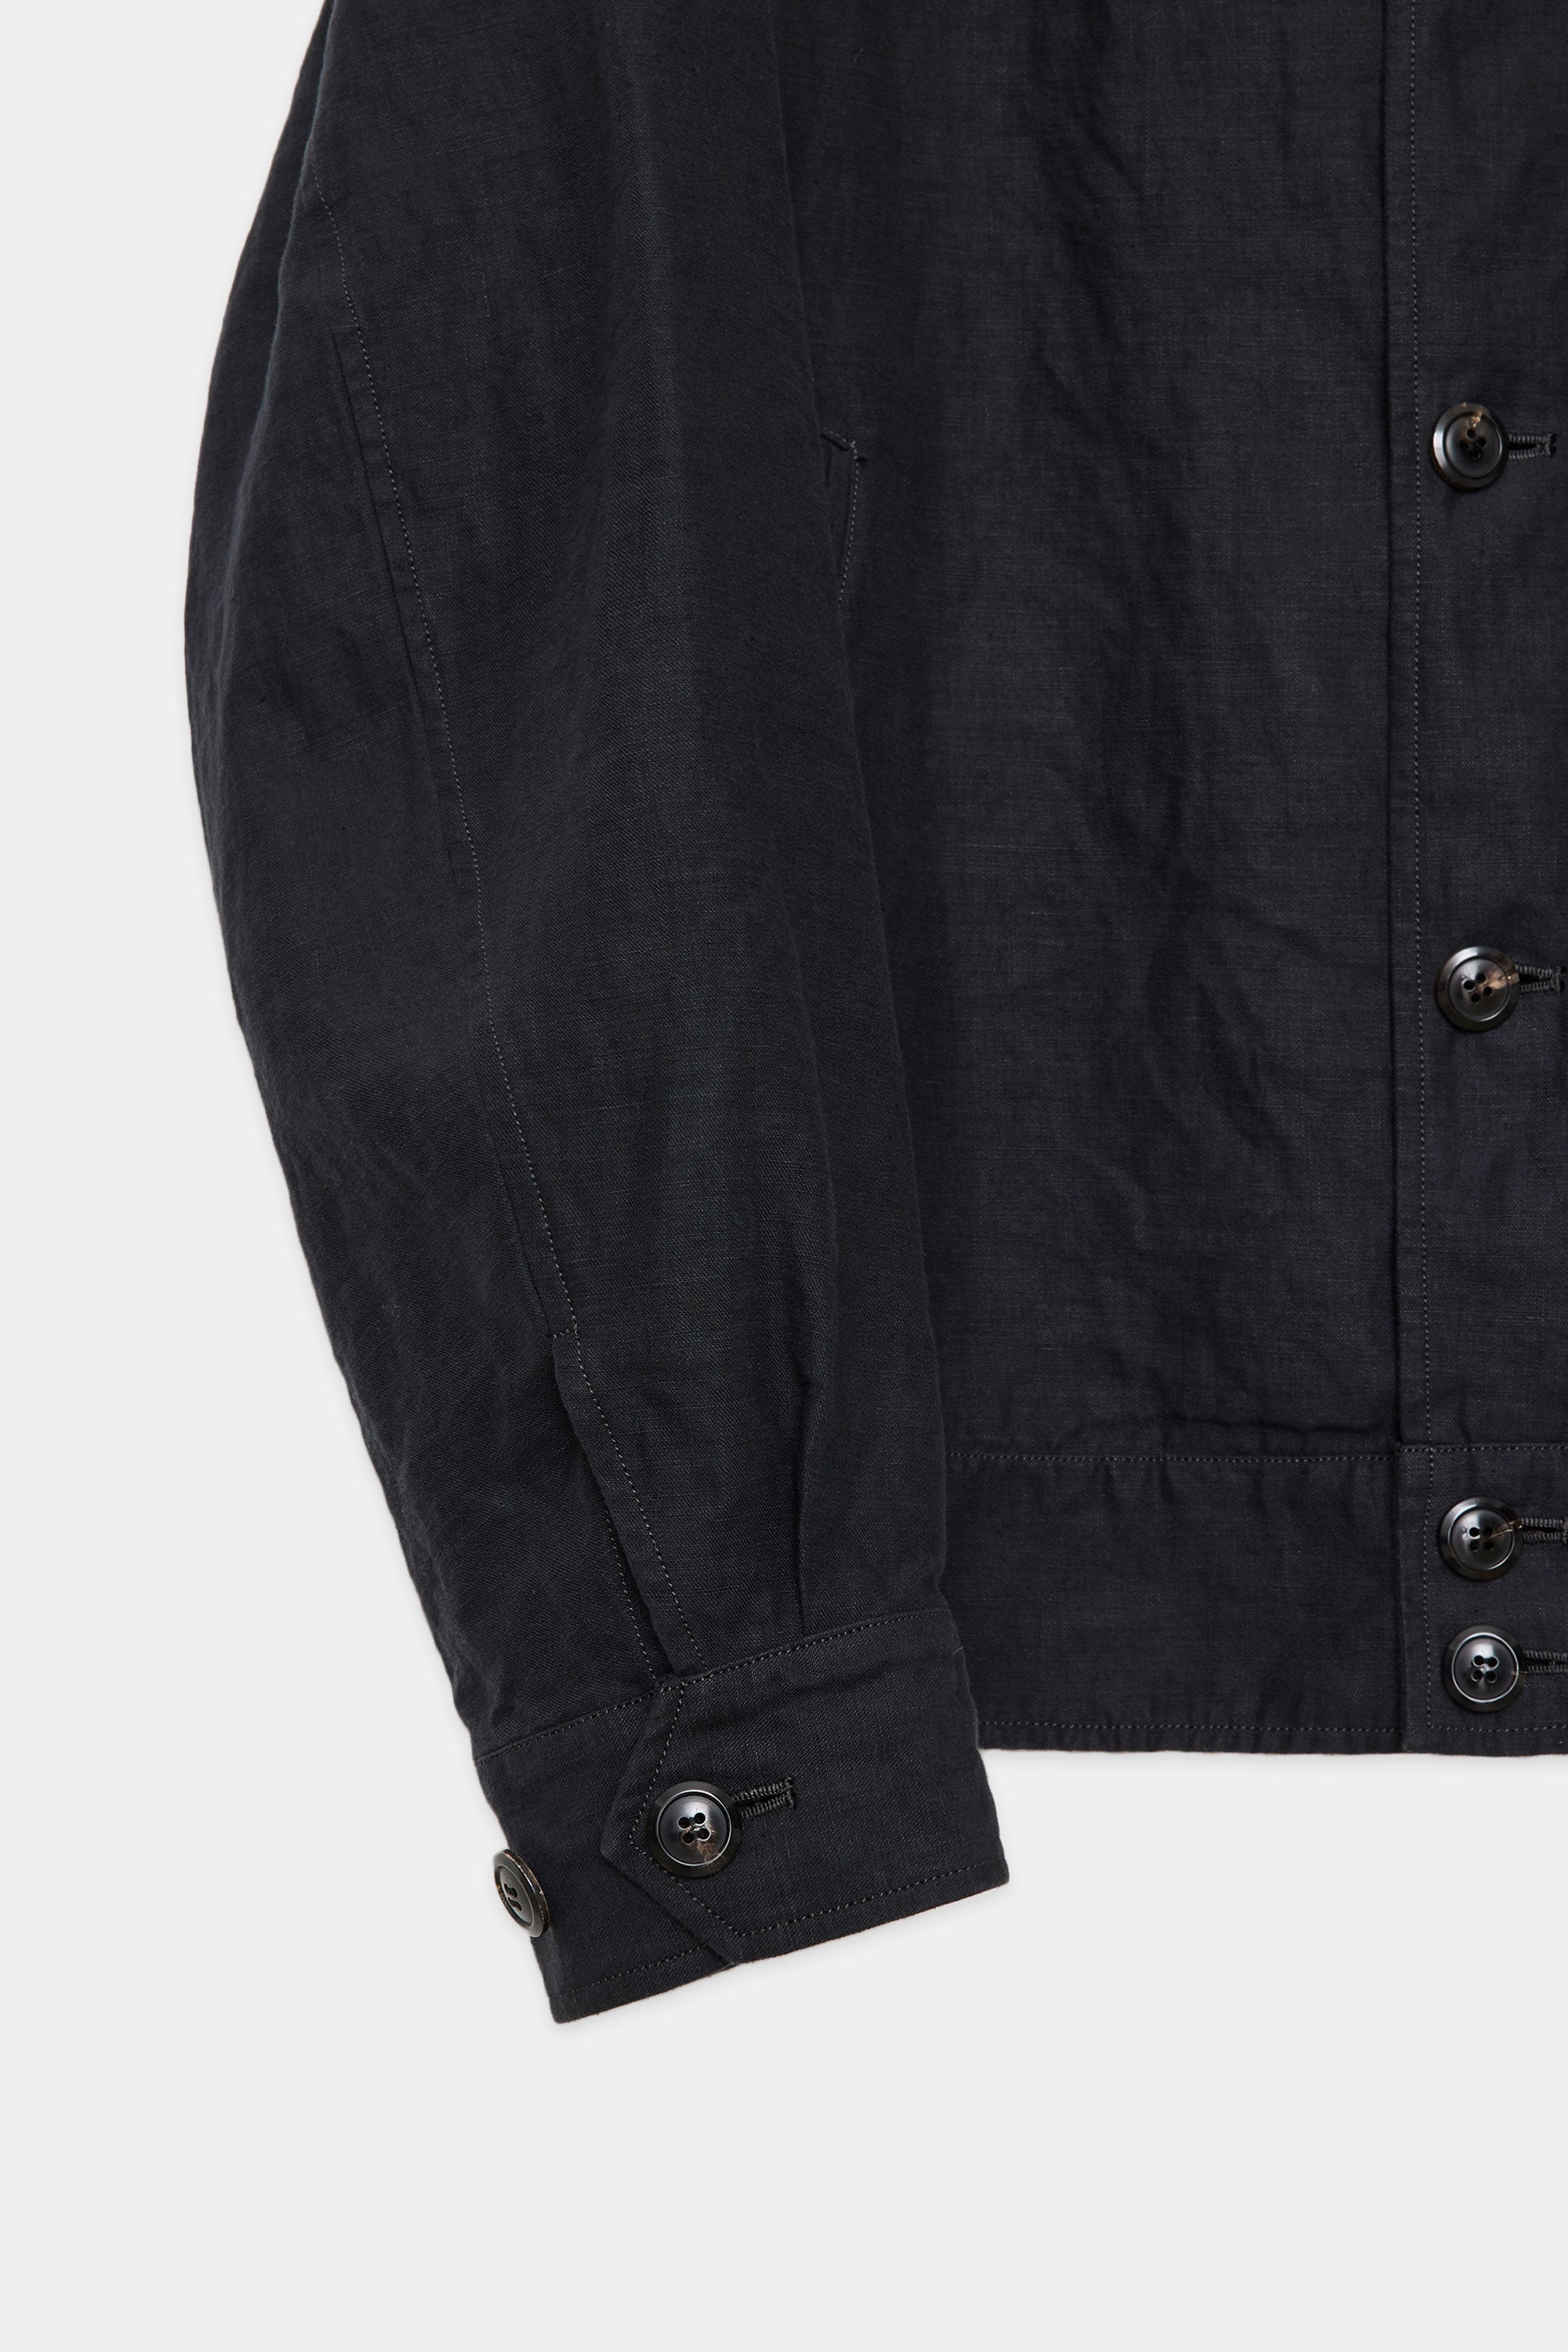 LINEN HIGH COUNT TWILL RIDING JACKET, Black